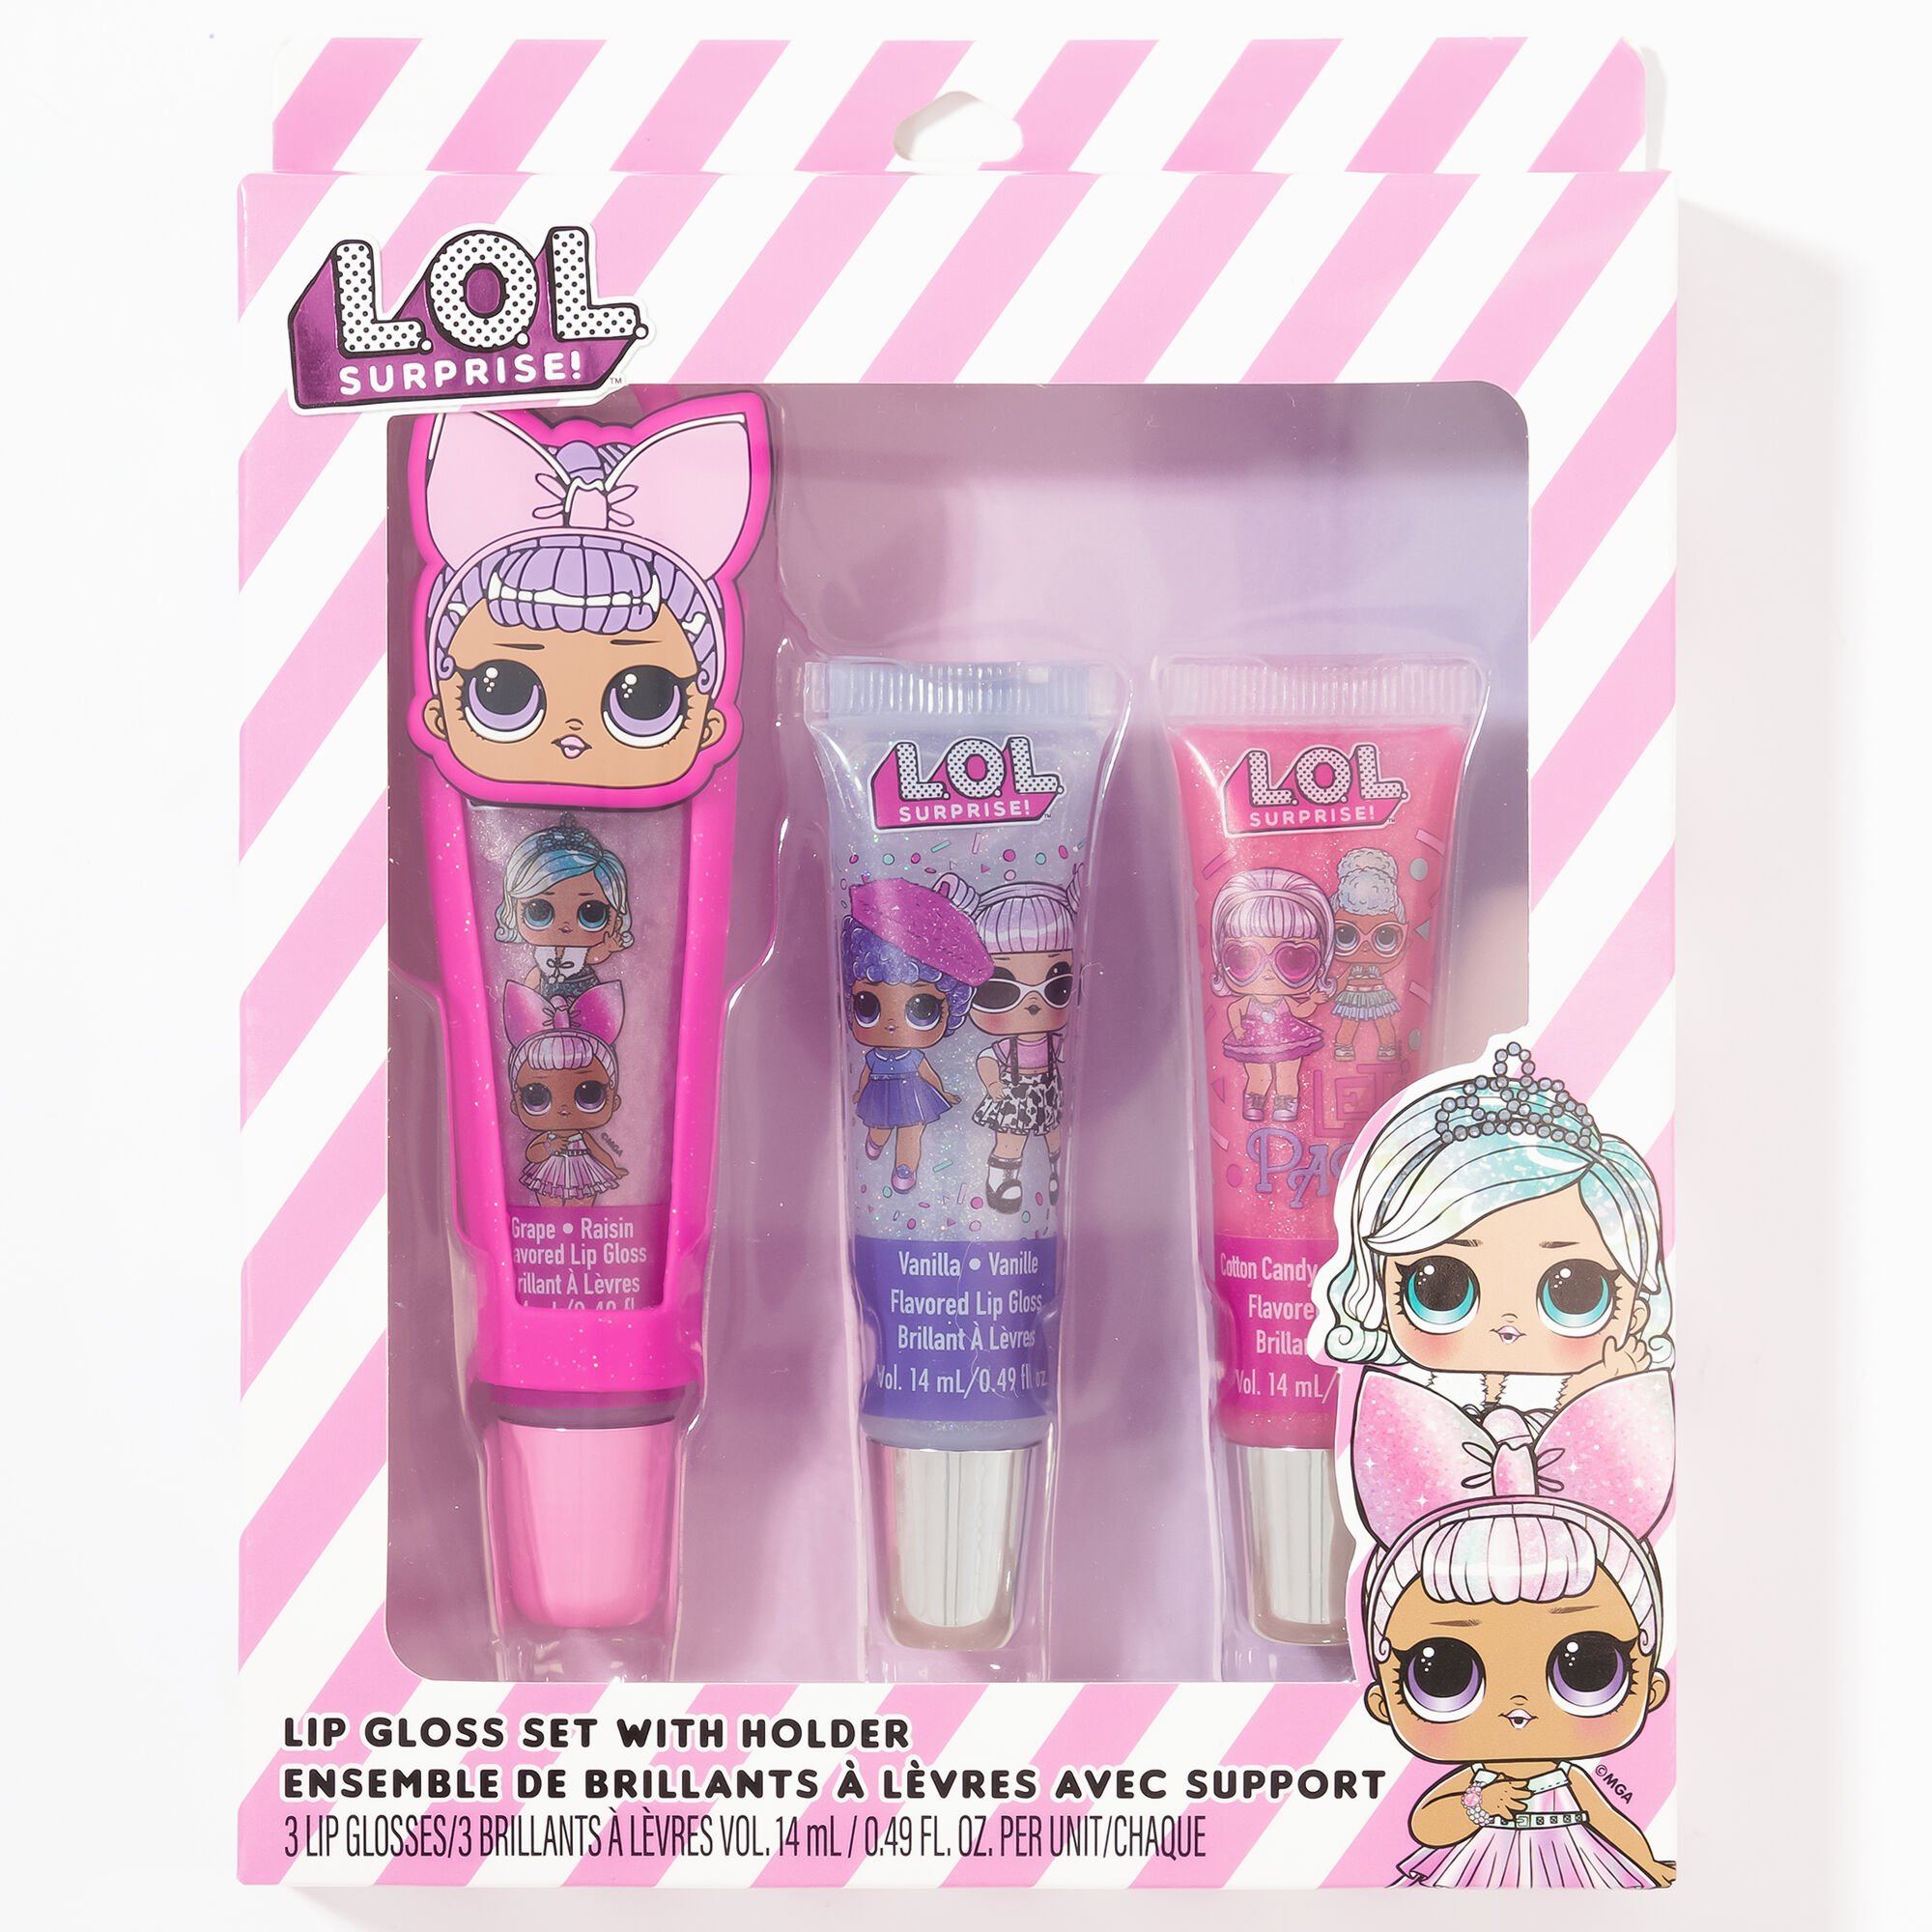 View Claires Lol Surprise Lip Gloss Set With Holder 3 Pack Pink information